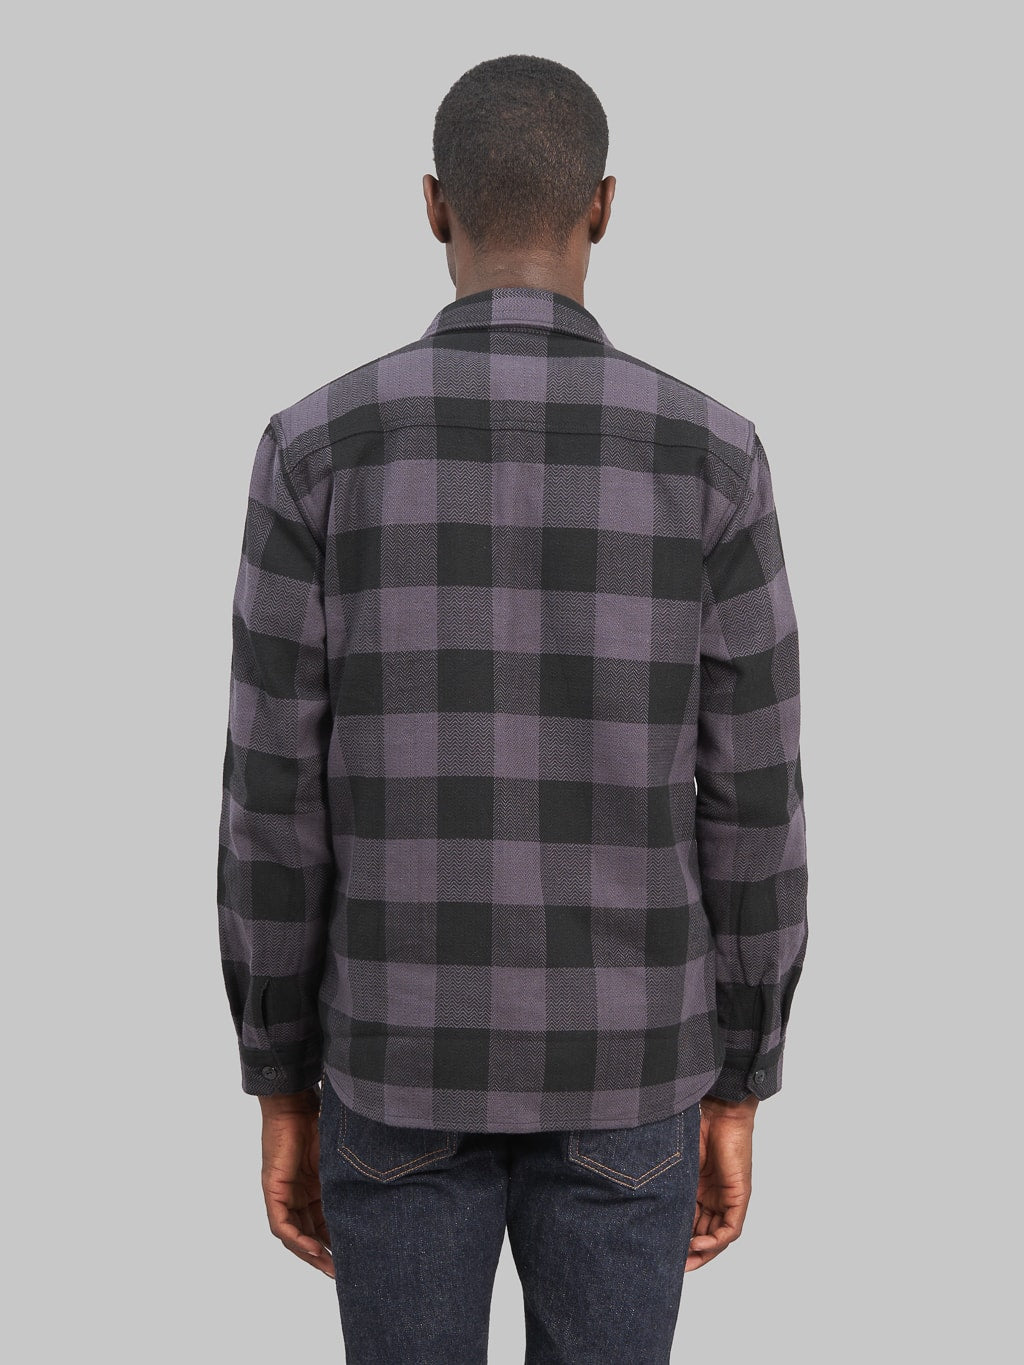 The Flat Head Block Check Flannel Shirt Grey model back fit